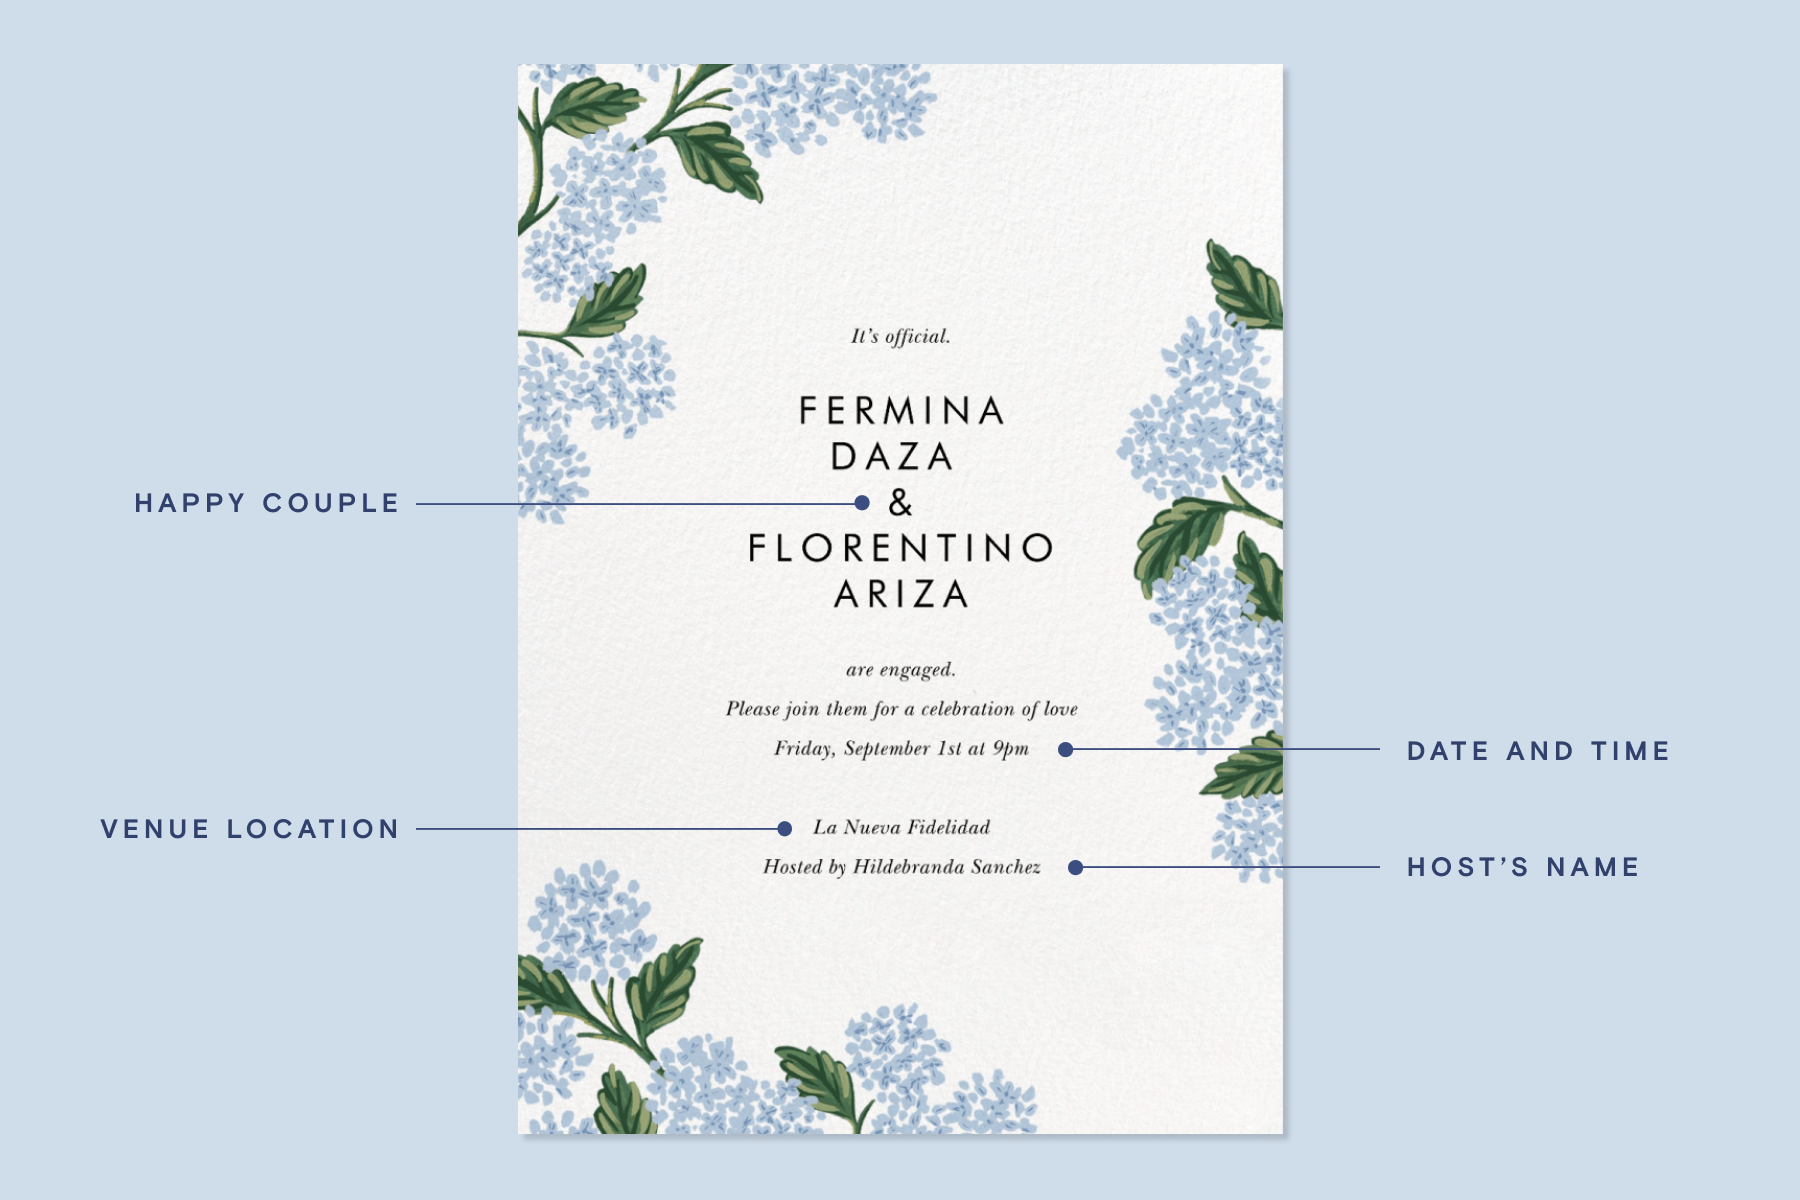 An engagement party invitation with blue hydrangeas with guidance for what to write on it, including the couple’s names, the date and time, the venue, and the host’s name.